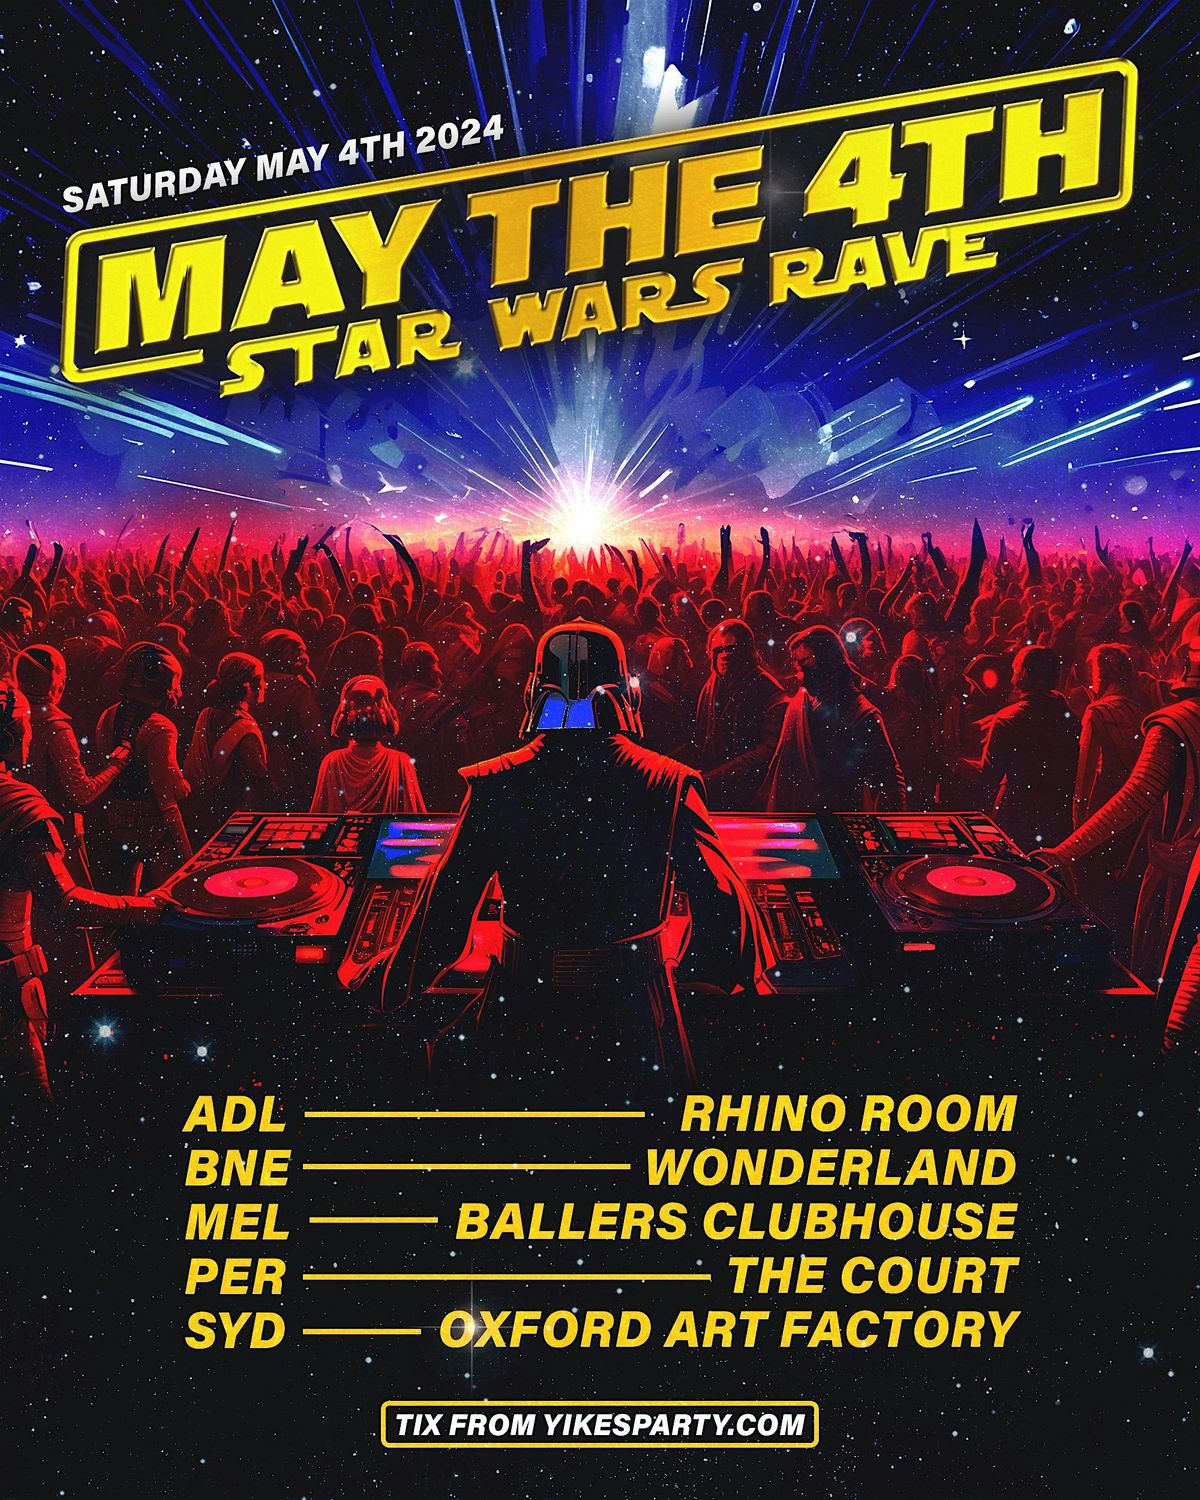 May the 4th - Star Wars Rave Brisbane